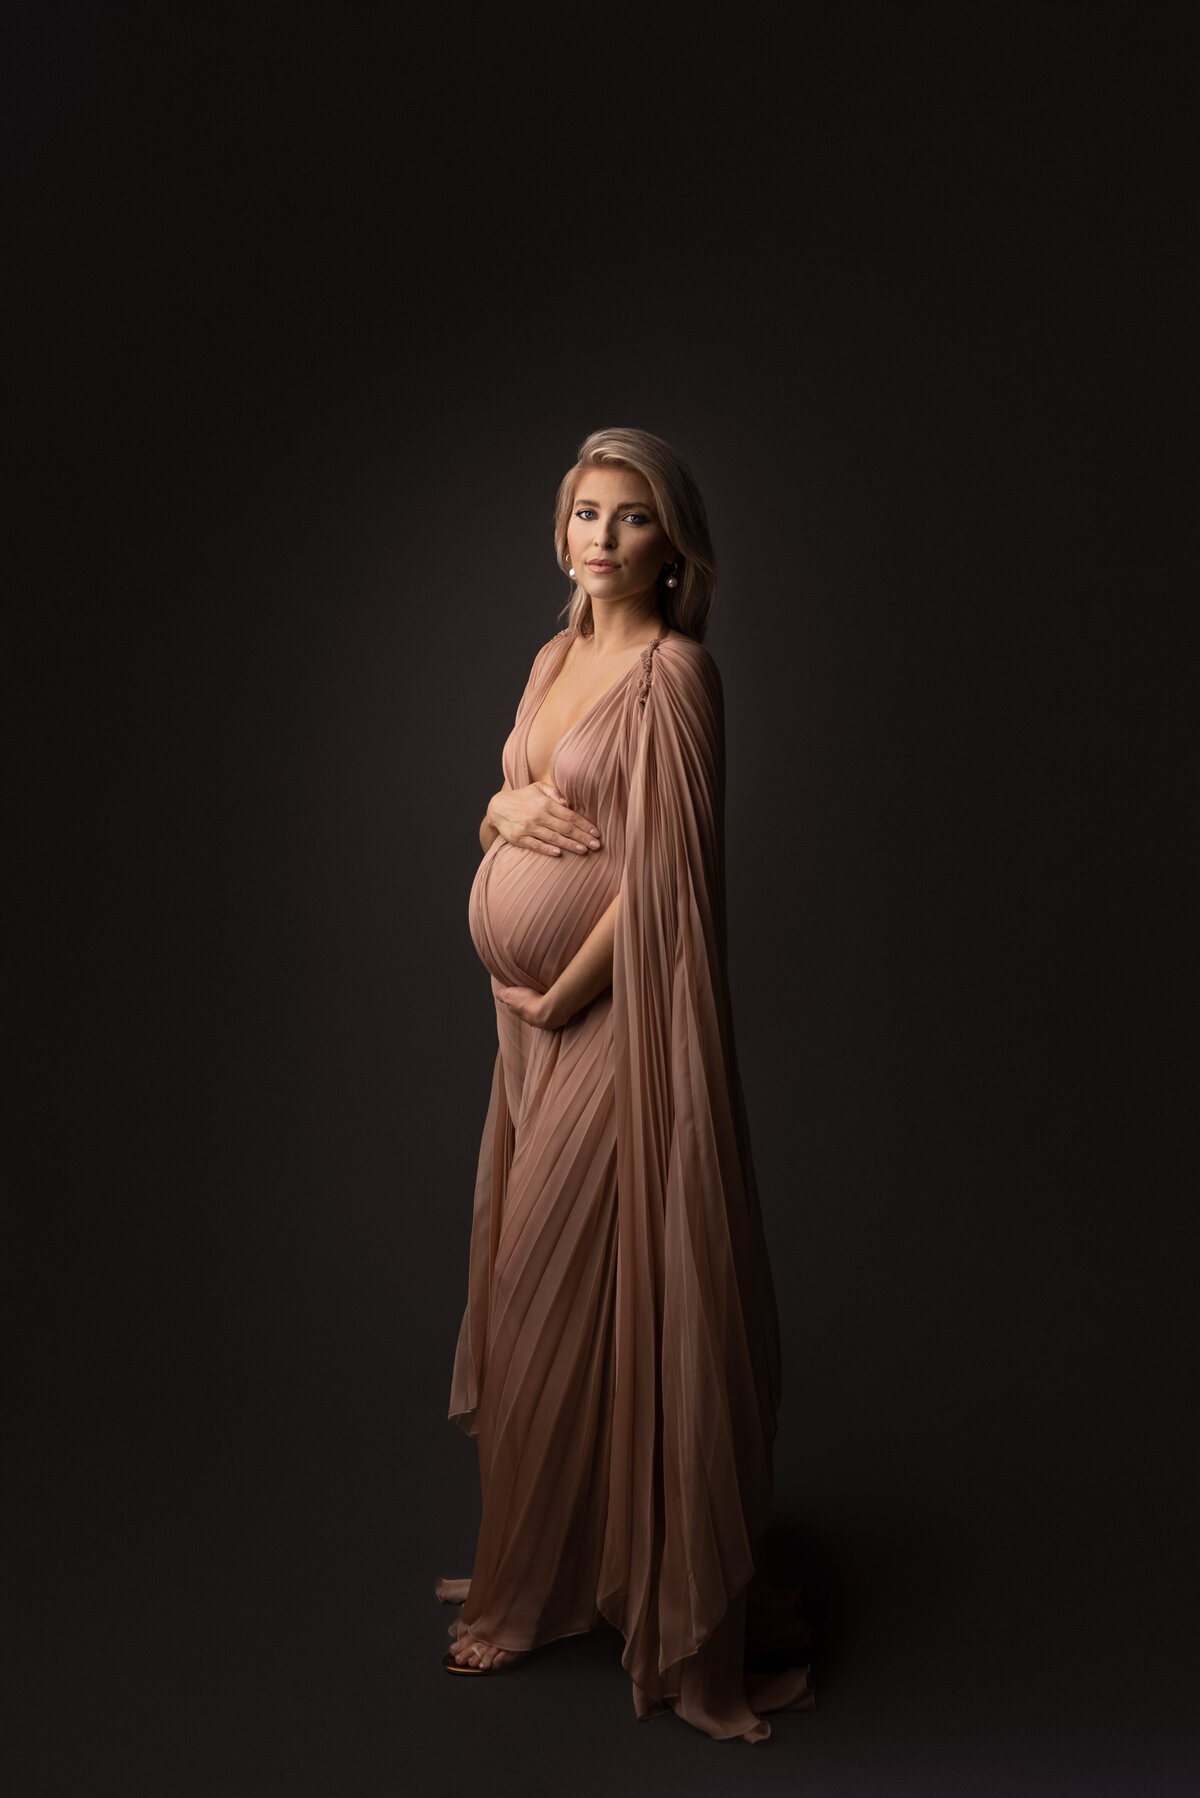 Woman poses for fine art maternity photos with New Jersey's best maternity photographer Katie Marshall. Woman in a floor-length dusty rose maternity gown with floor-length caped sleeves stands angled to the camera. One hand is above her baby bump, the other underneath. She is looking over her shoulder at the camera. Light envelops her face; her back is shadowed creating depth.